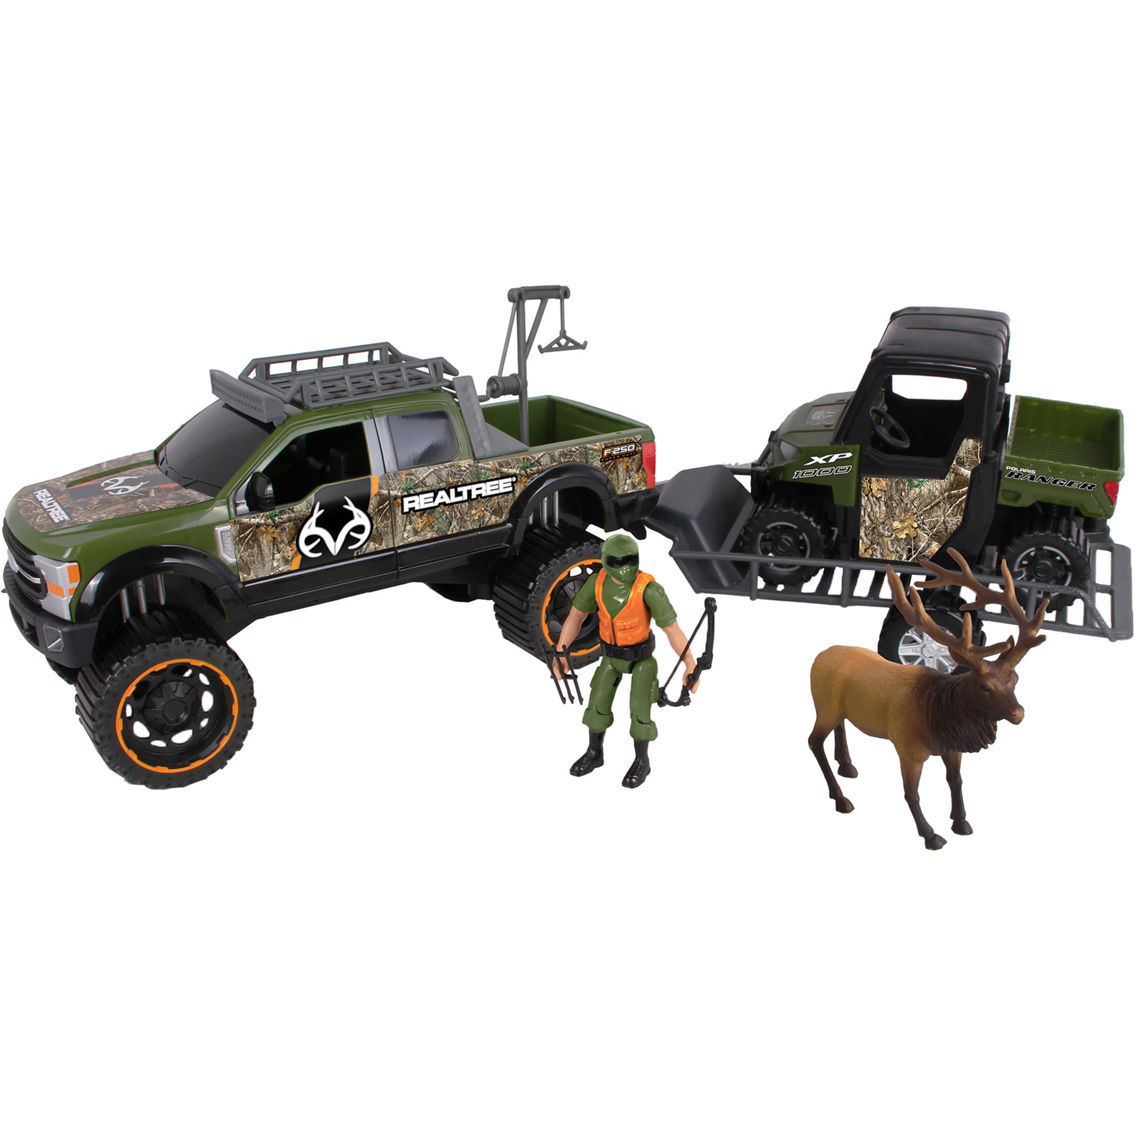 RealTree Ford F250 Super Duty 10 pc. Playset - Image 2 of 4